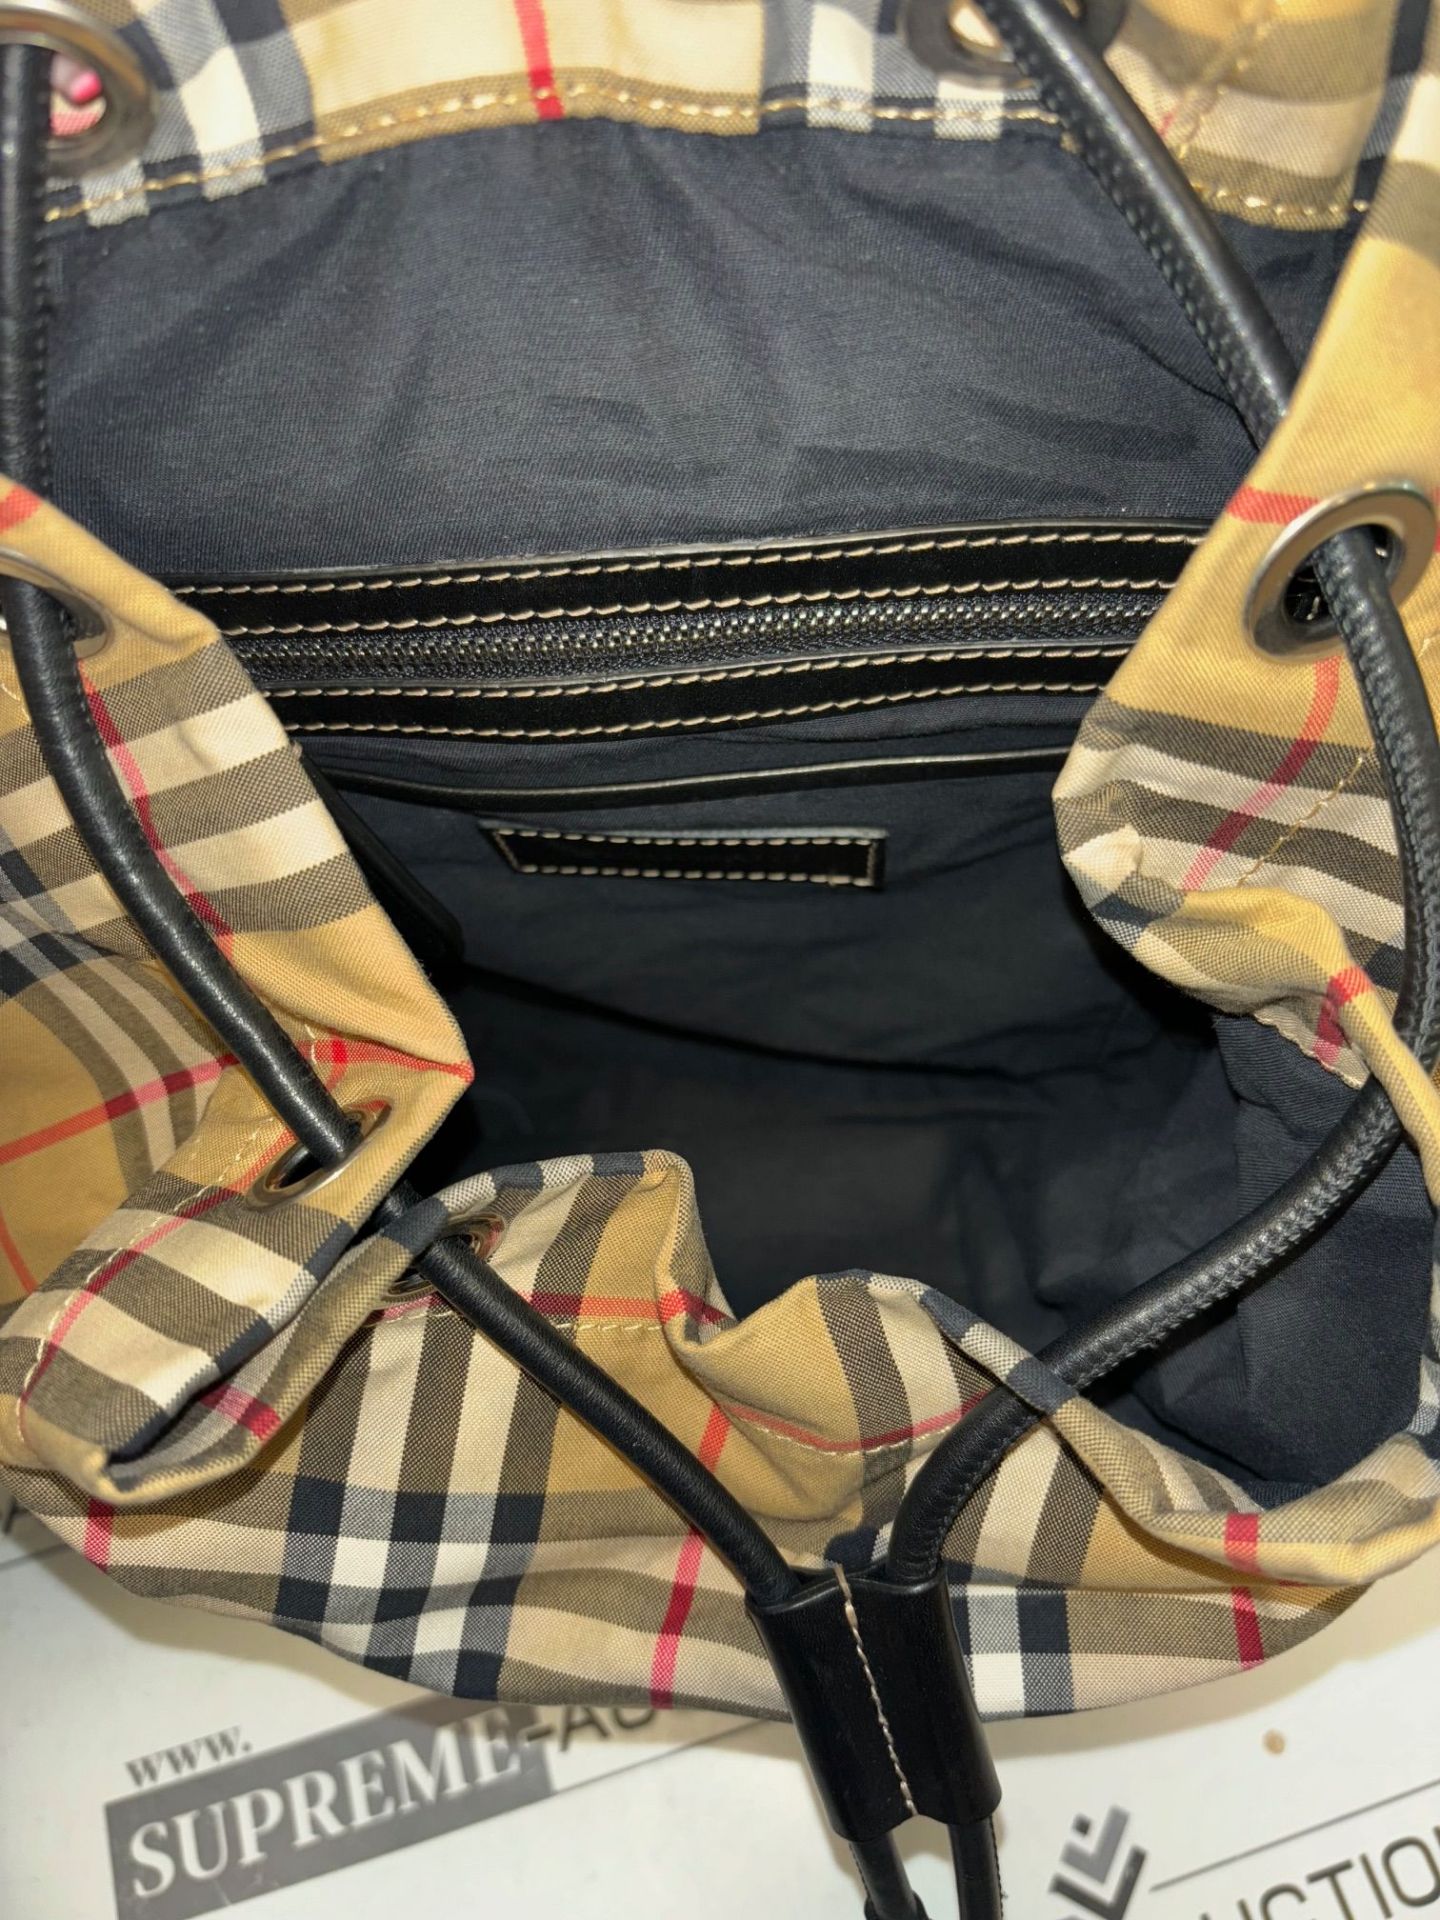 Burberry check backpack. 35x35cm - Image 9 of 9